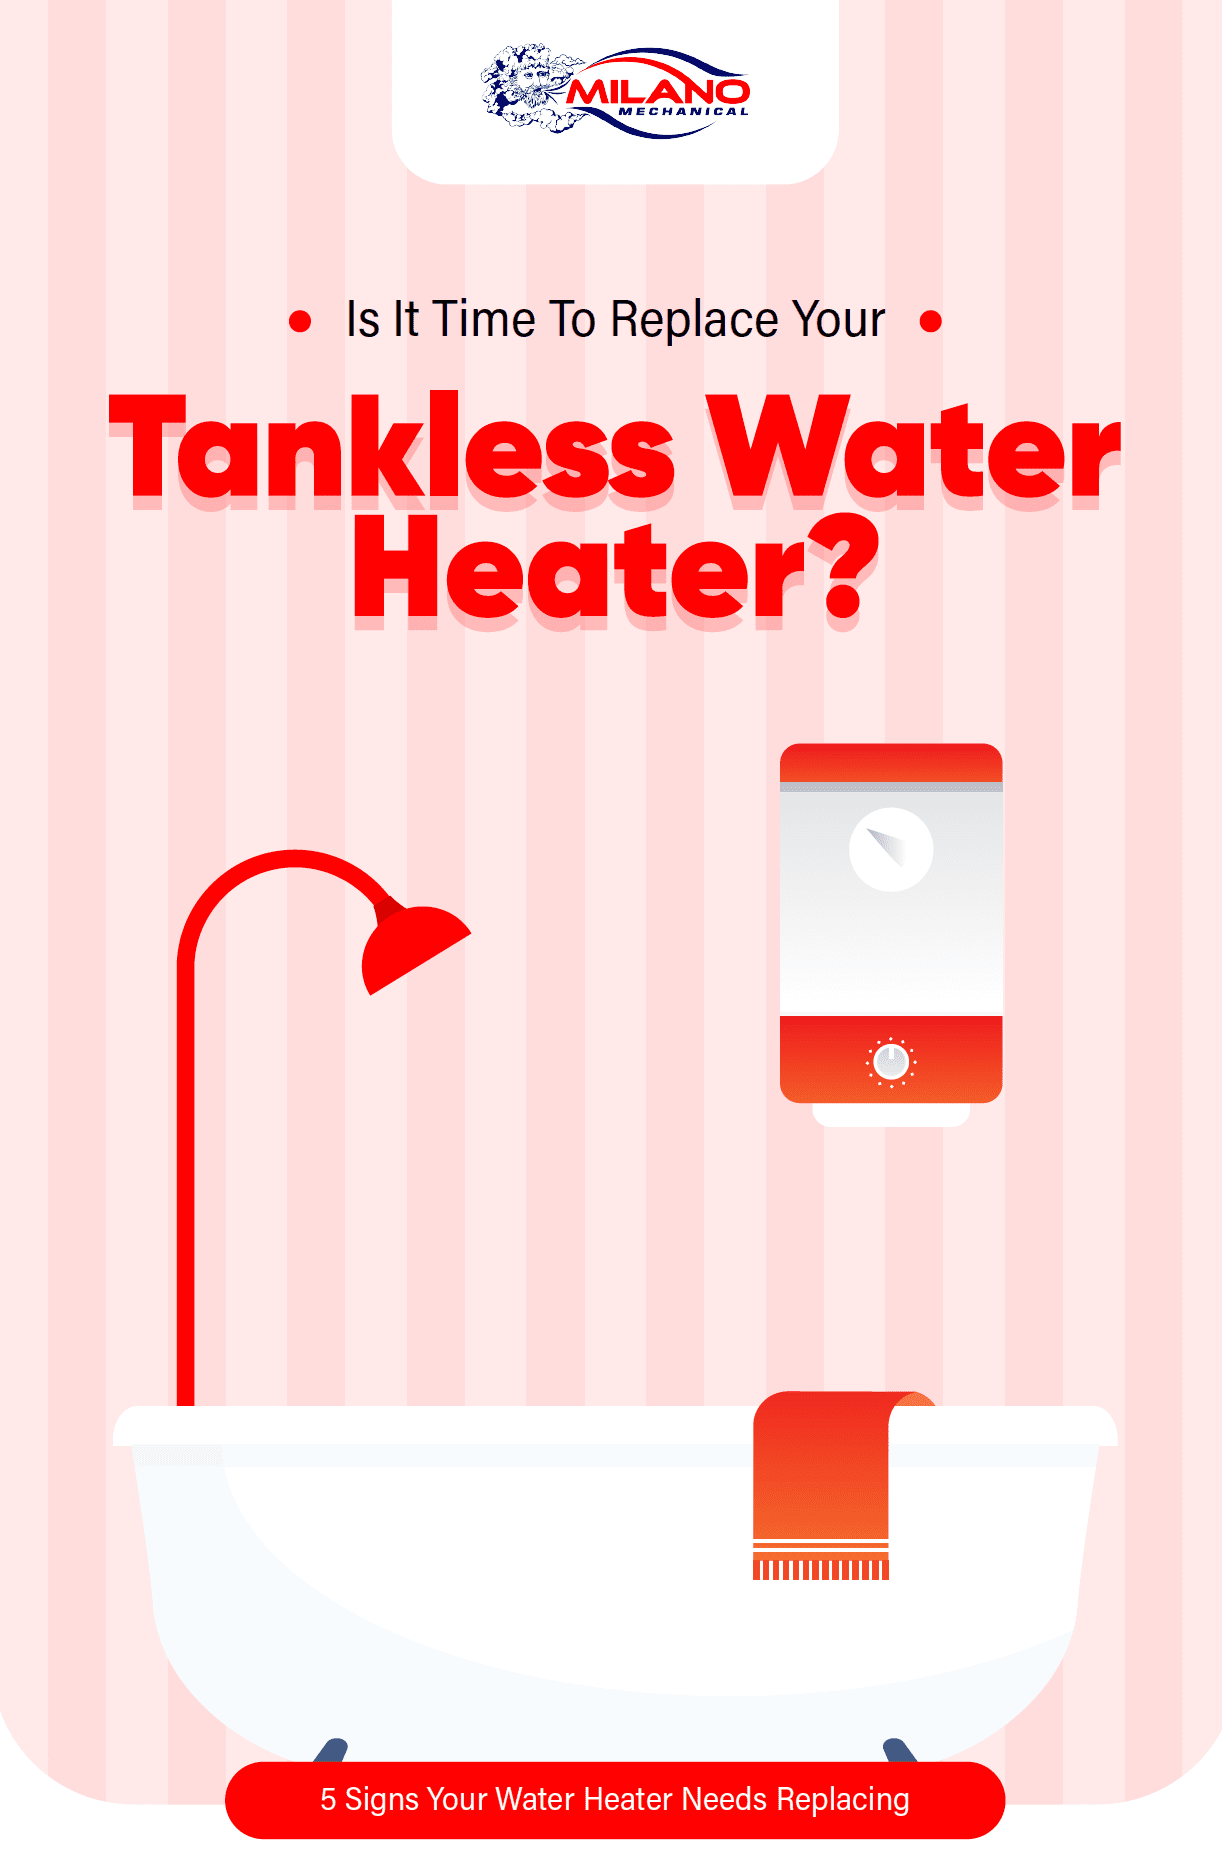 Is it time to replace you tankless water heater infographic cover image